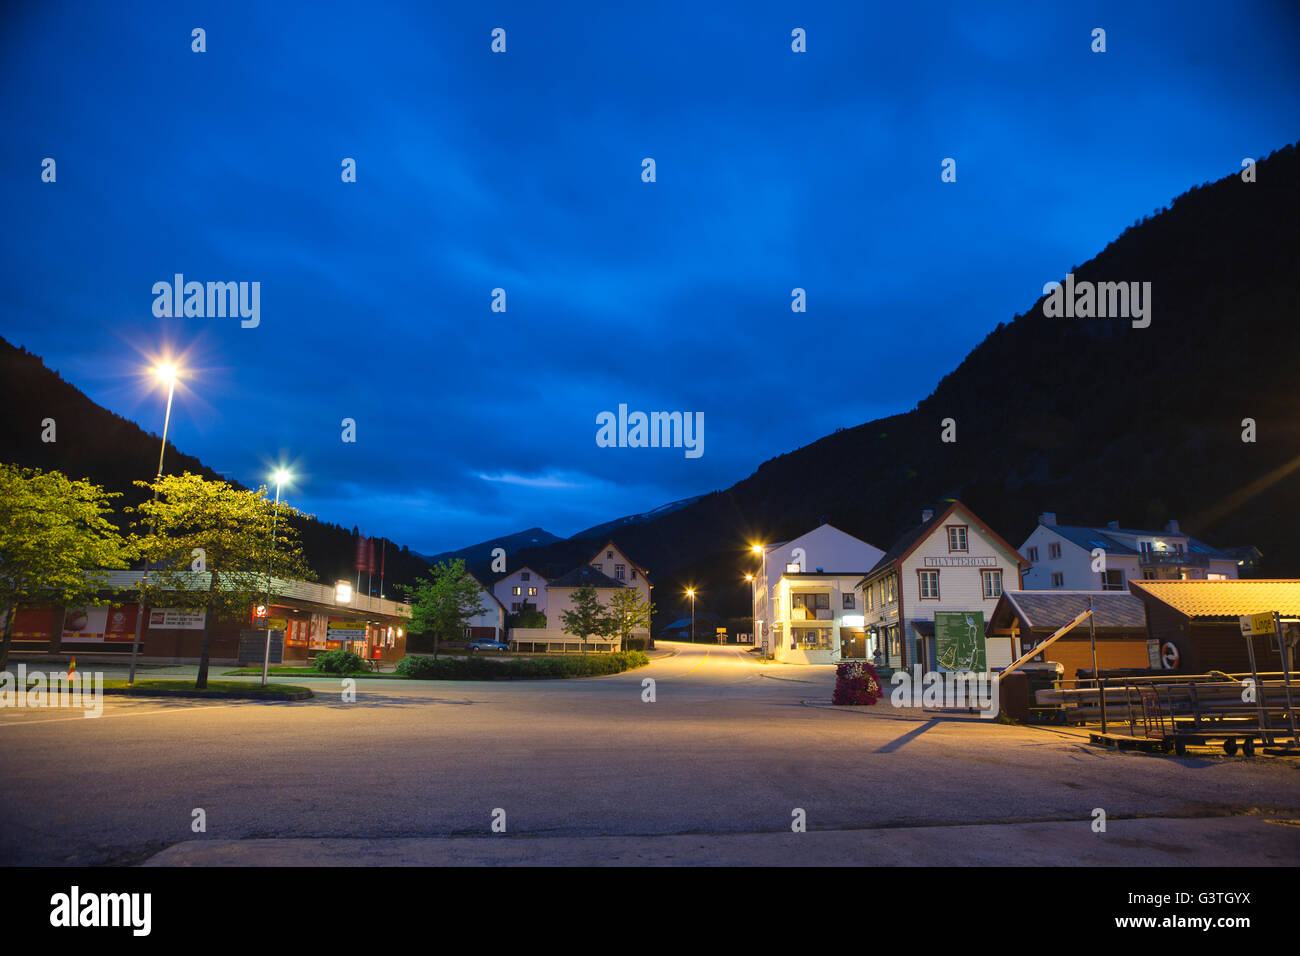 Norway, More og Romsdal, Sunnmore, Eidsdal, View of buildings in town at dusk Stock Photo